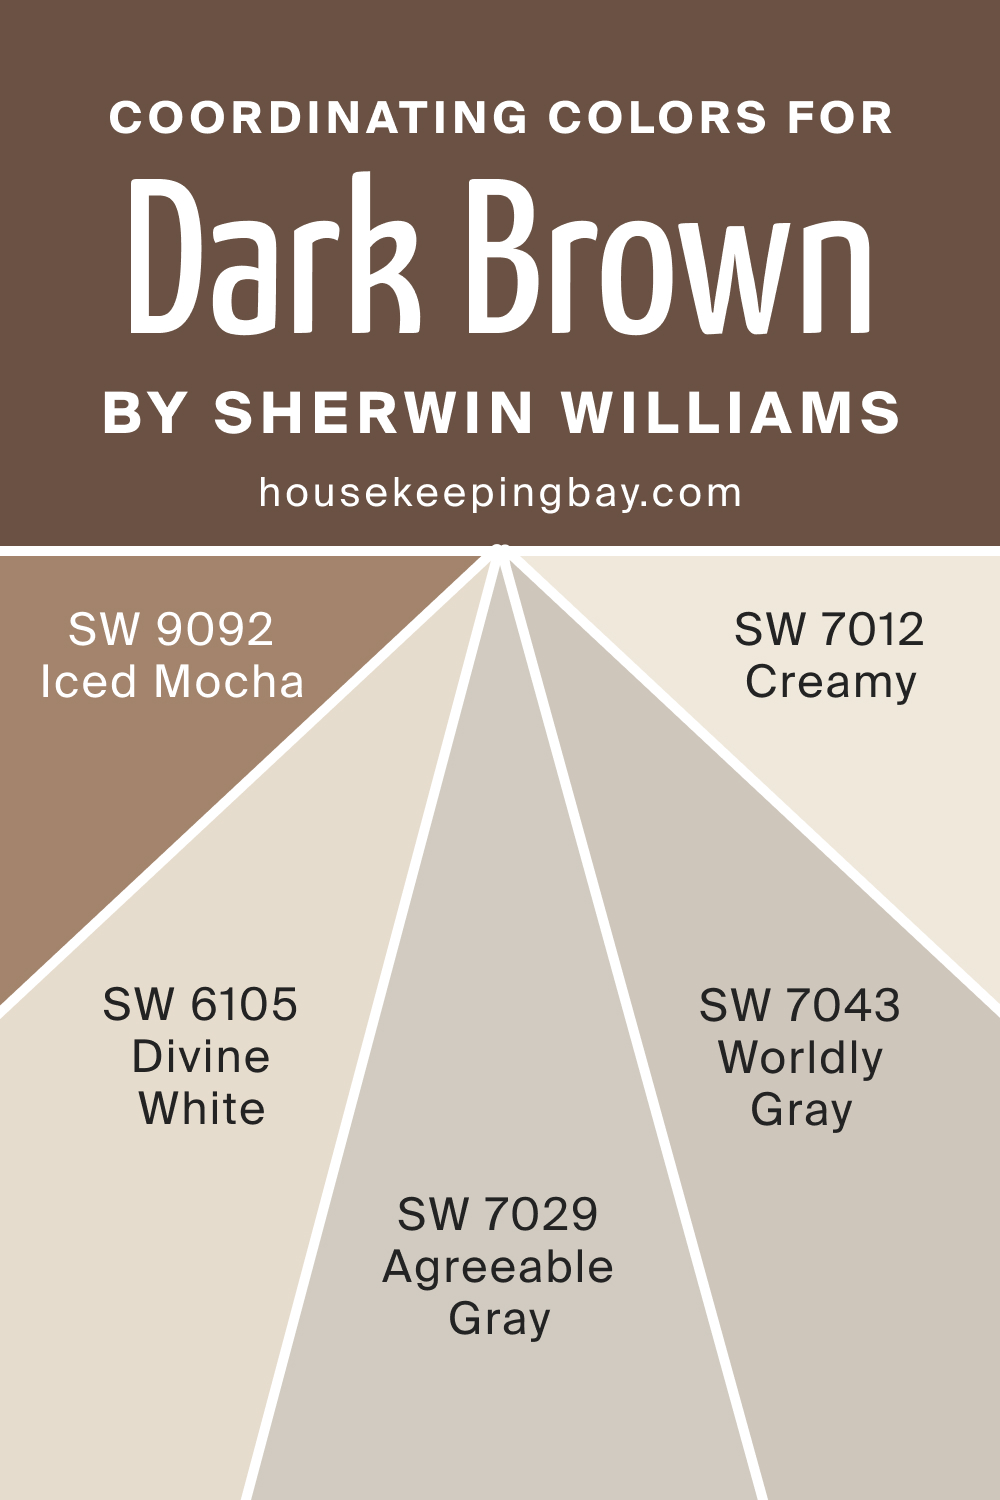 Coordinating Colors for SW 7520 Dark Brown by Sherwin Williams